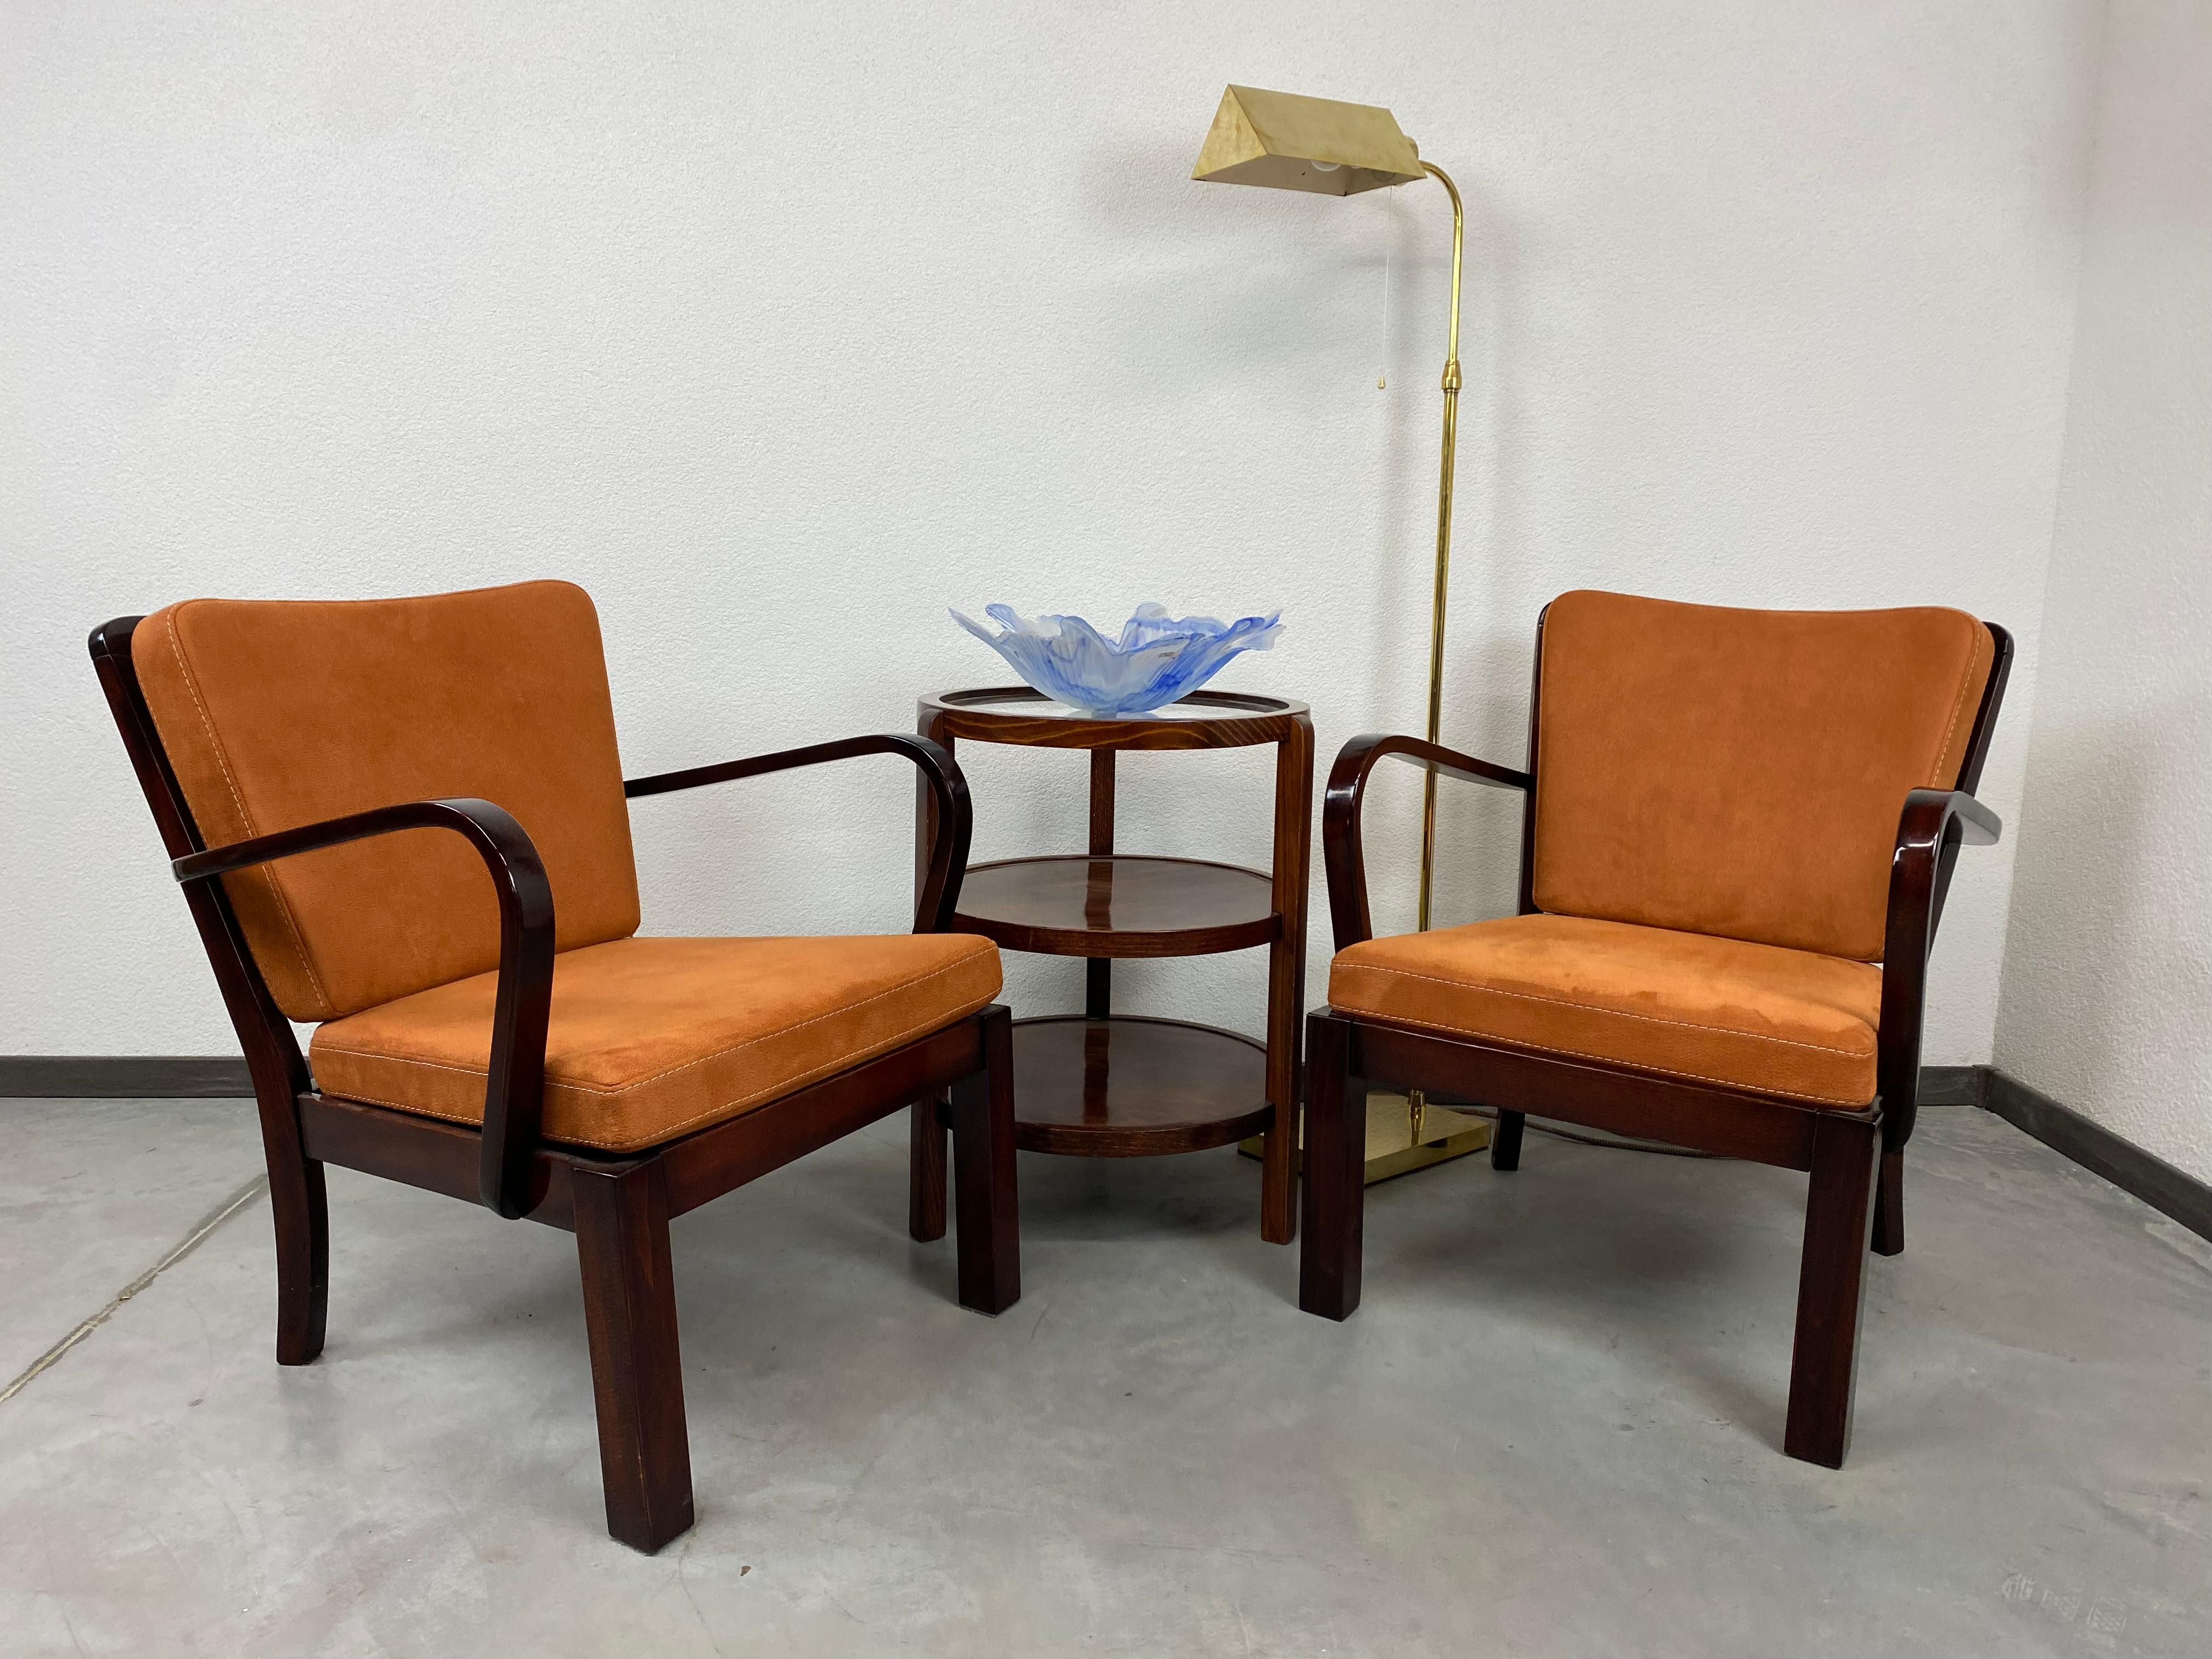 Pair of Thonet Mundus armchairs professionally stained and repolished with new terracotta fabric.